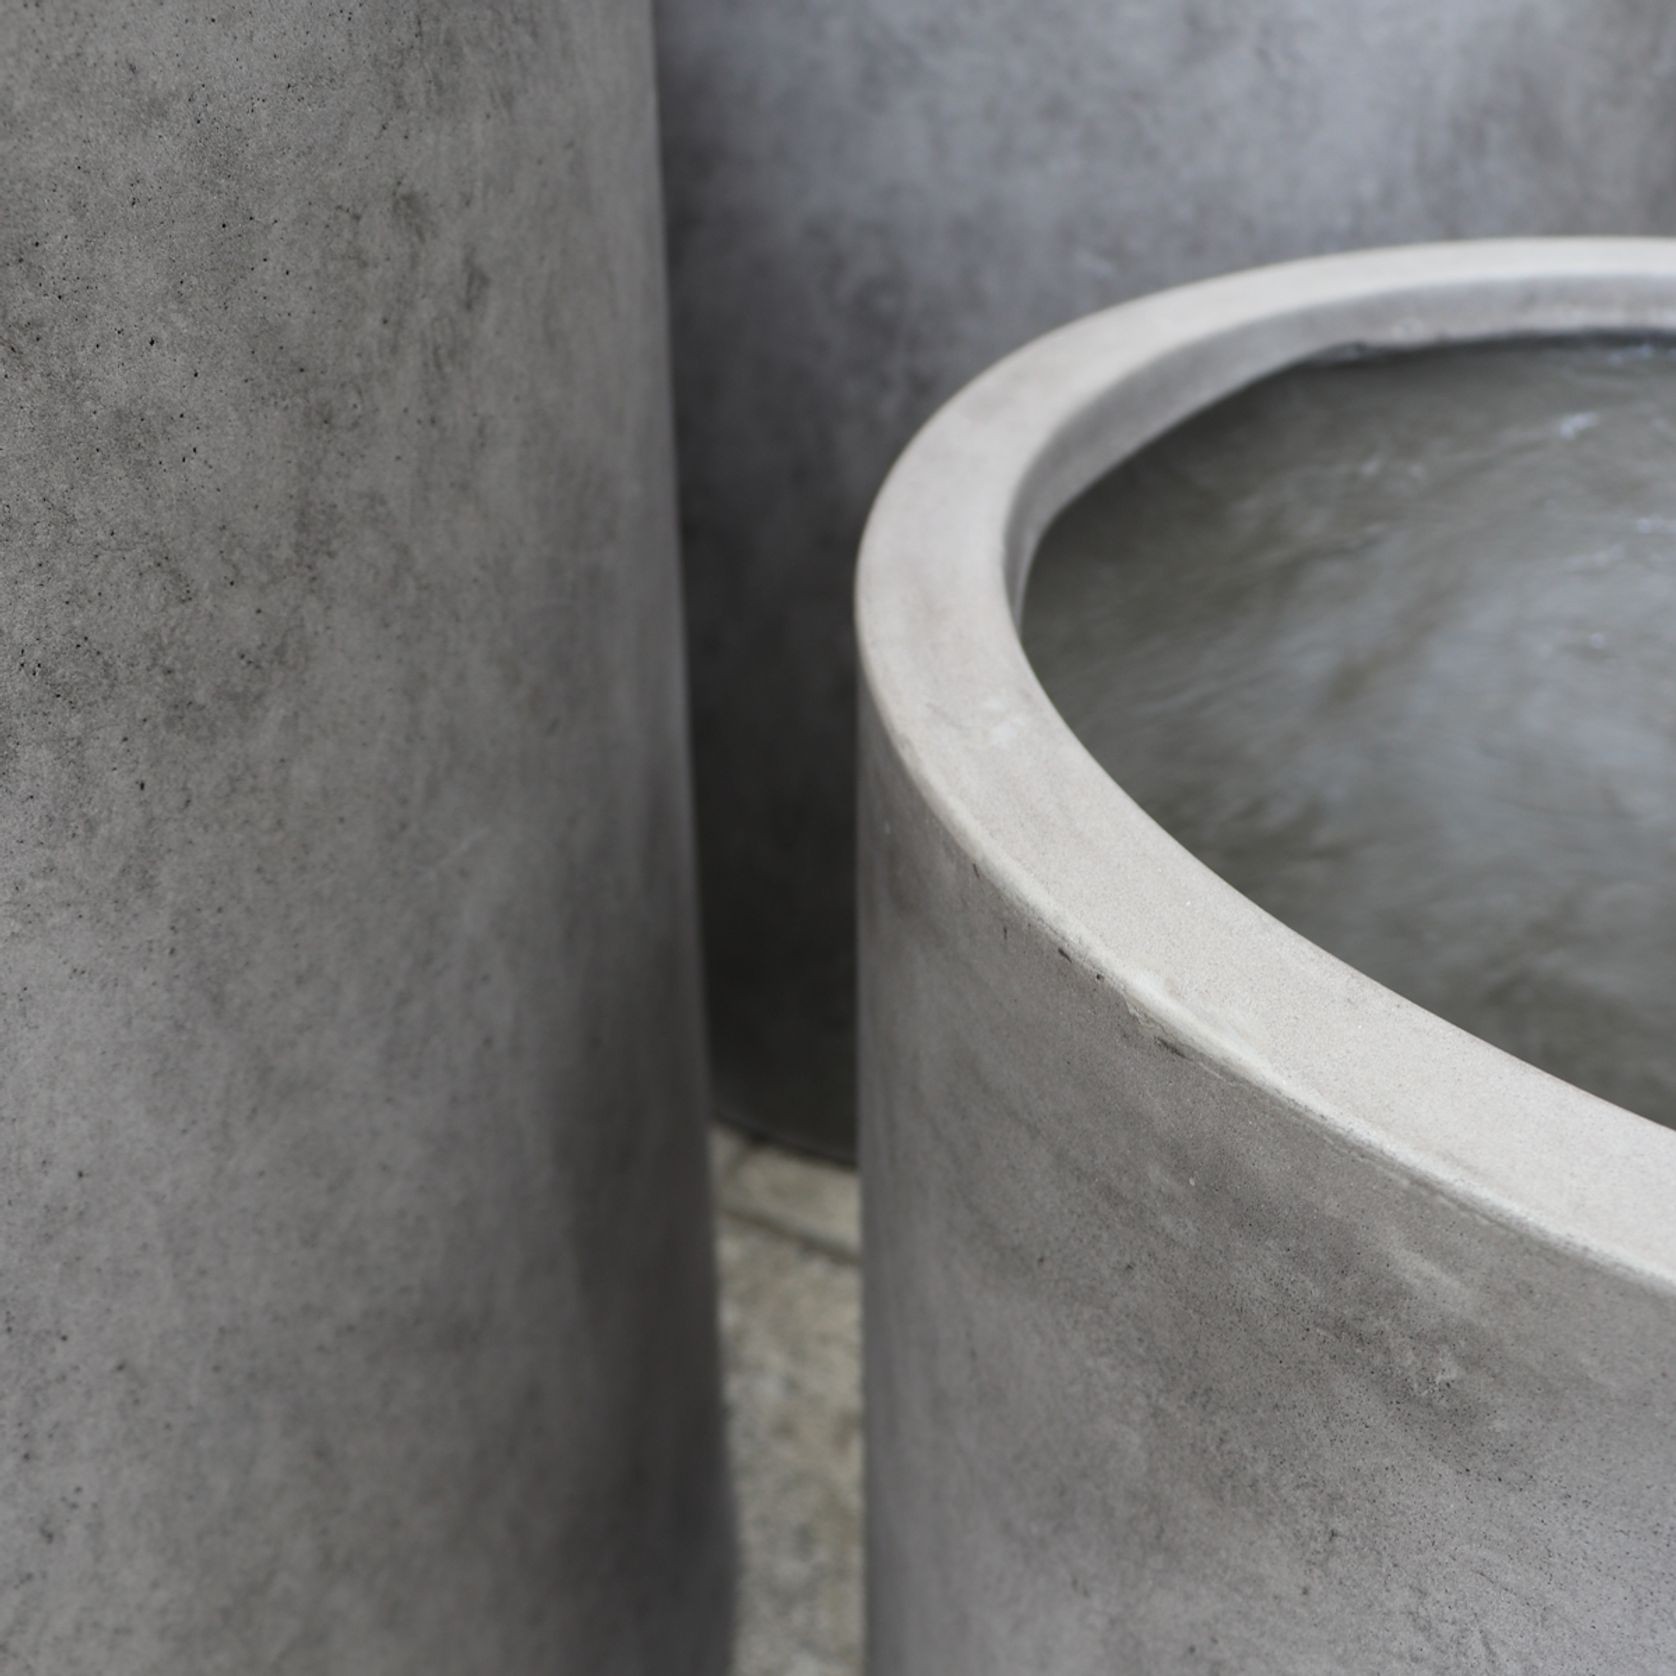 Mikonui Cylinder Planter Weathered Cement - Medium gallery detail image